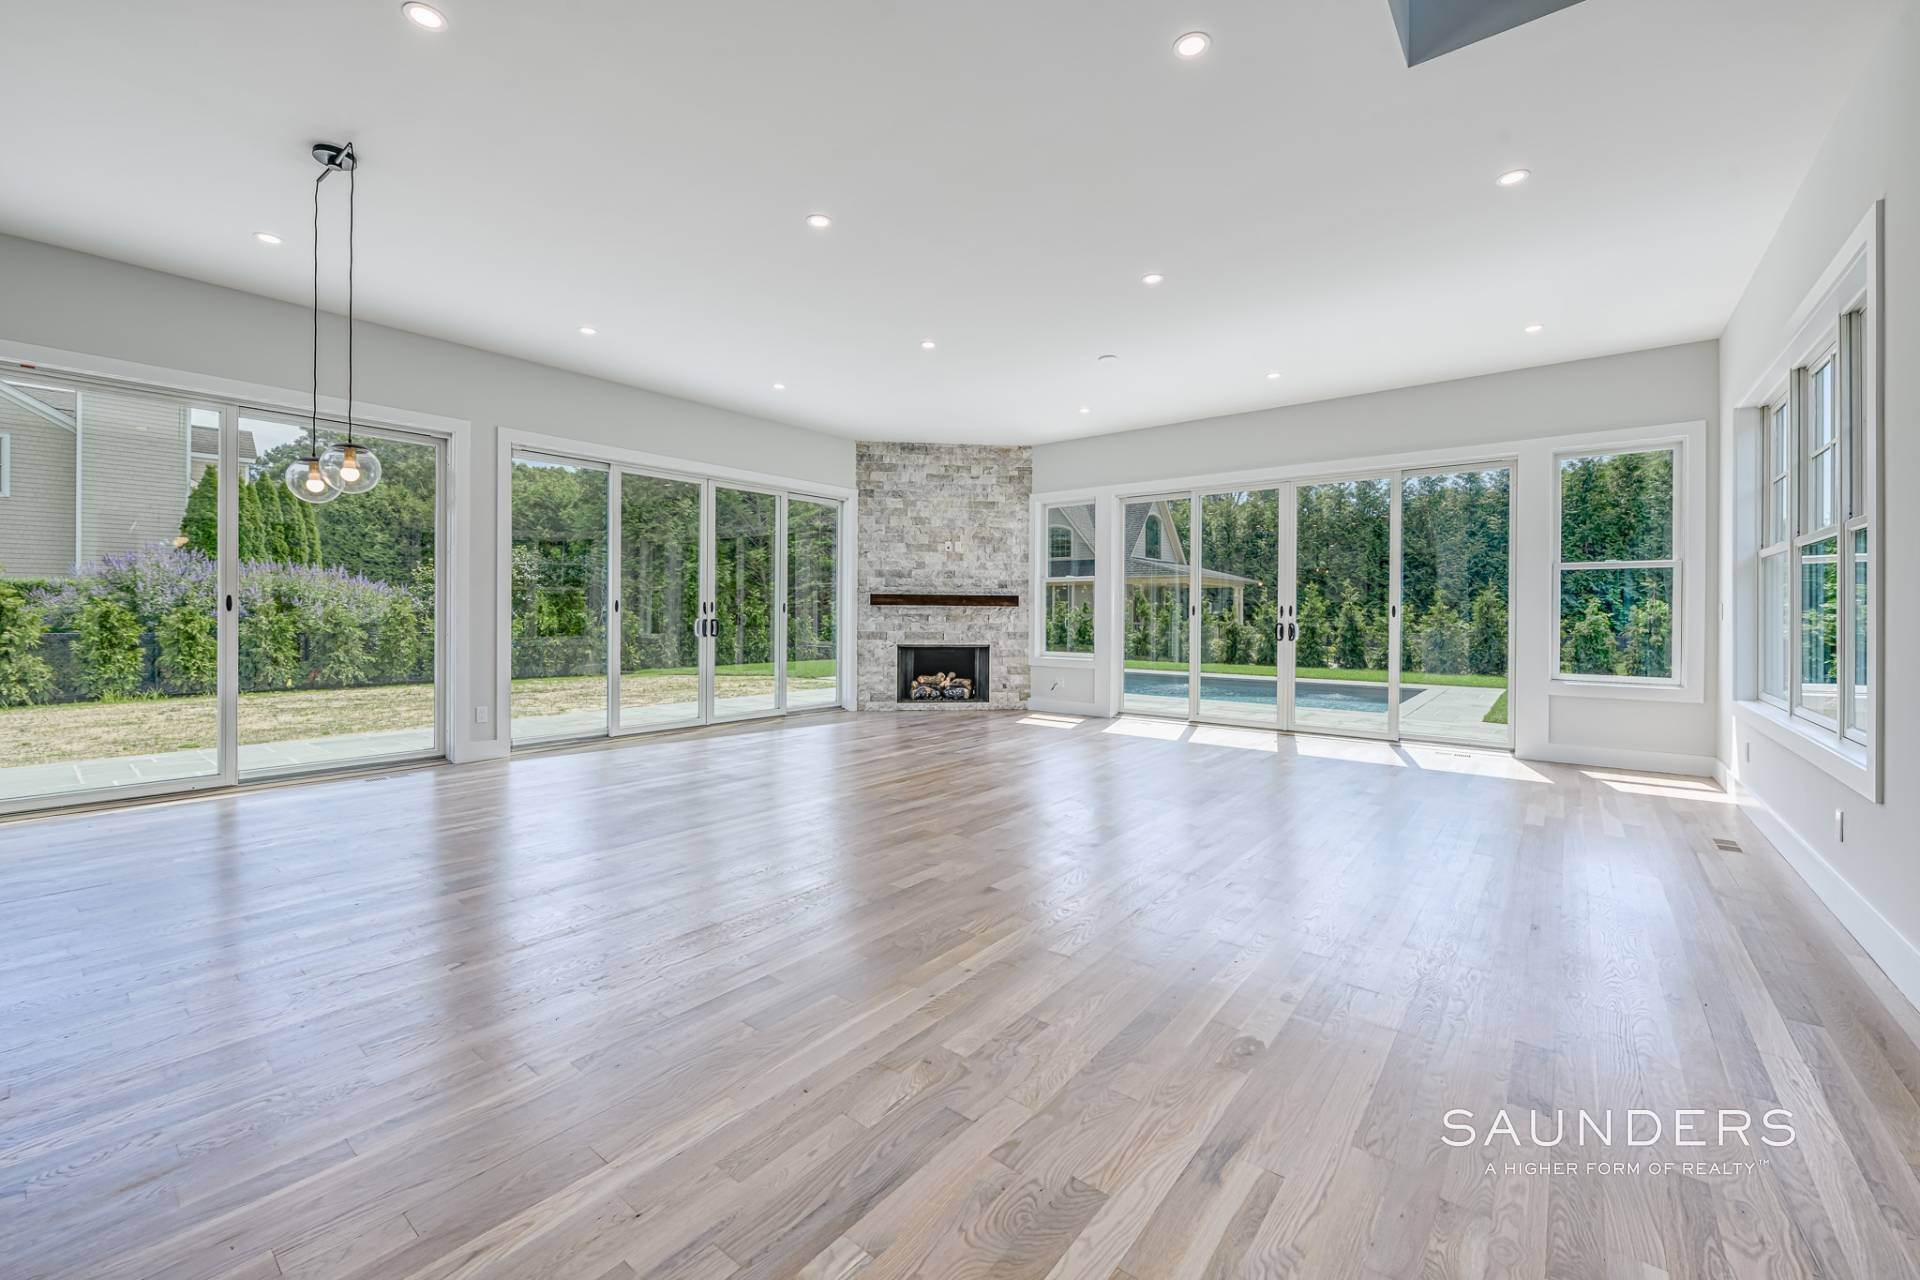 7. Single Family Homes for Sale at New Construction With Saltwater Pool In Desirable Quogue Village 46 Jessup Avenue, Quogue, NY 11959